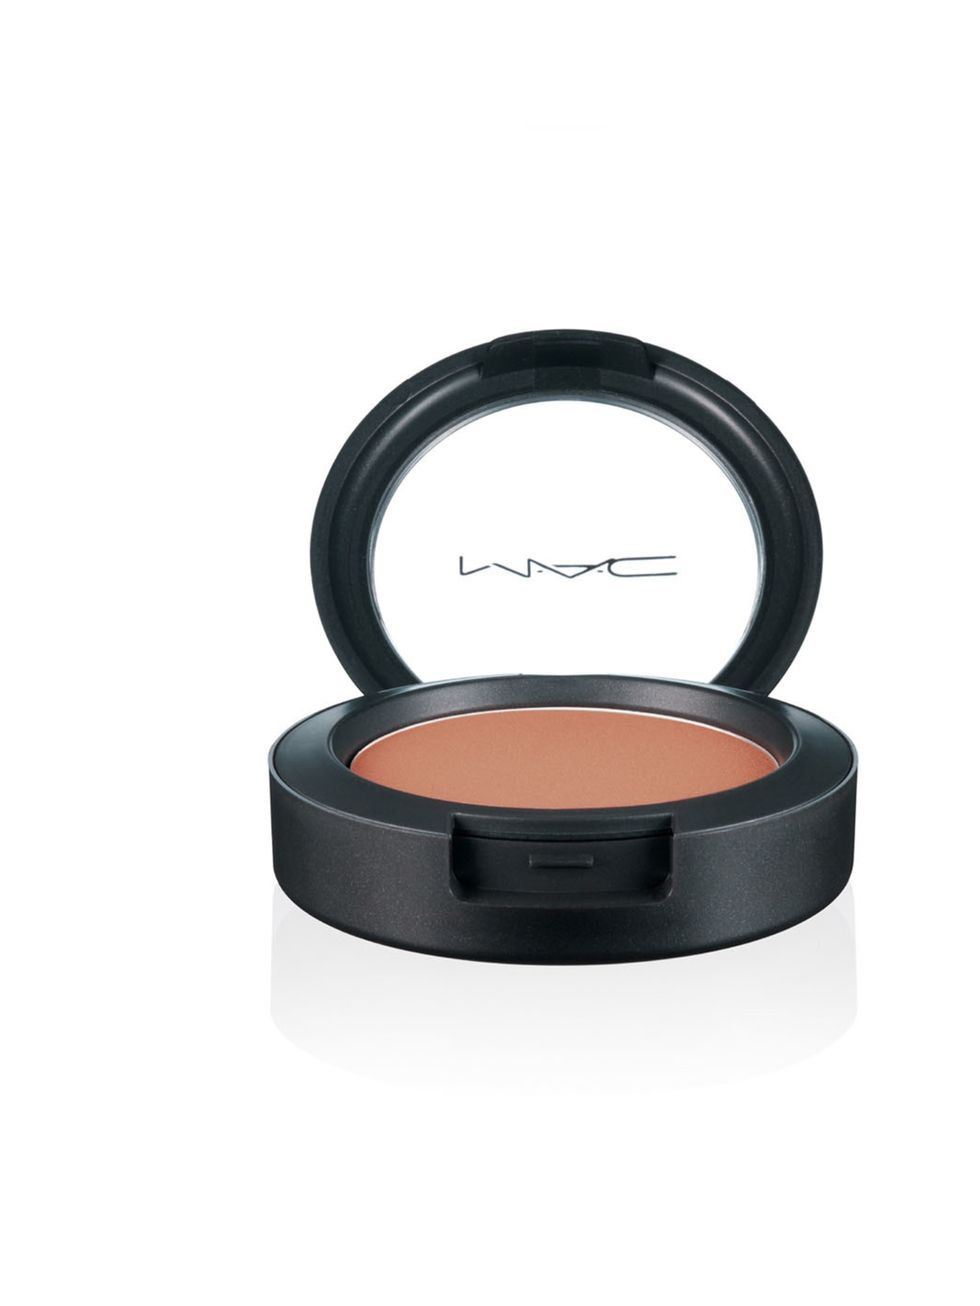 <p><strong><a href="http://www.maccosmetics.co.uk/product/shaded/156/329/">MAC Powder Blusher in Peaches, £17.50</a></strong>Perfect if its your first day at the beach and youre feeling a bit pale. A blusher will instantly liven up your face without hea